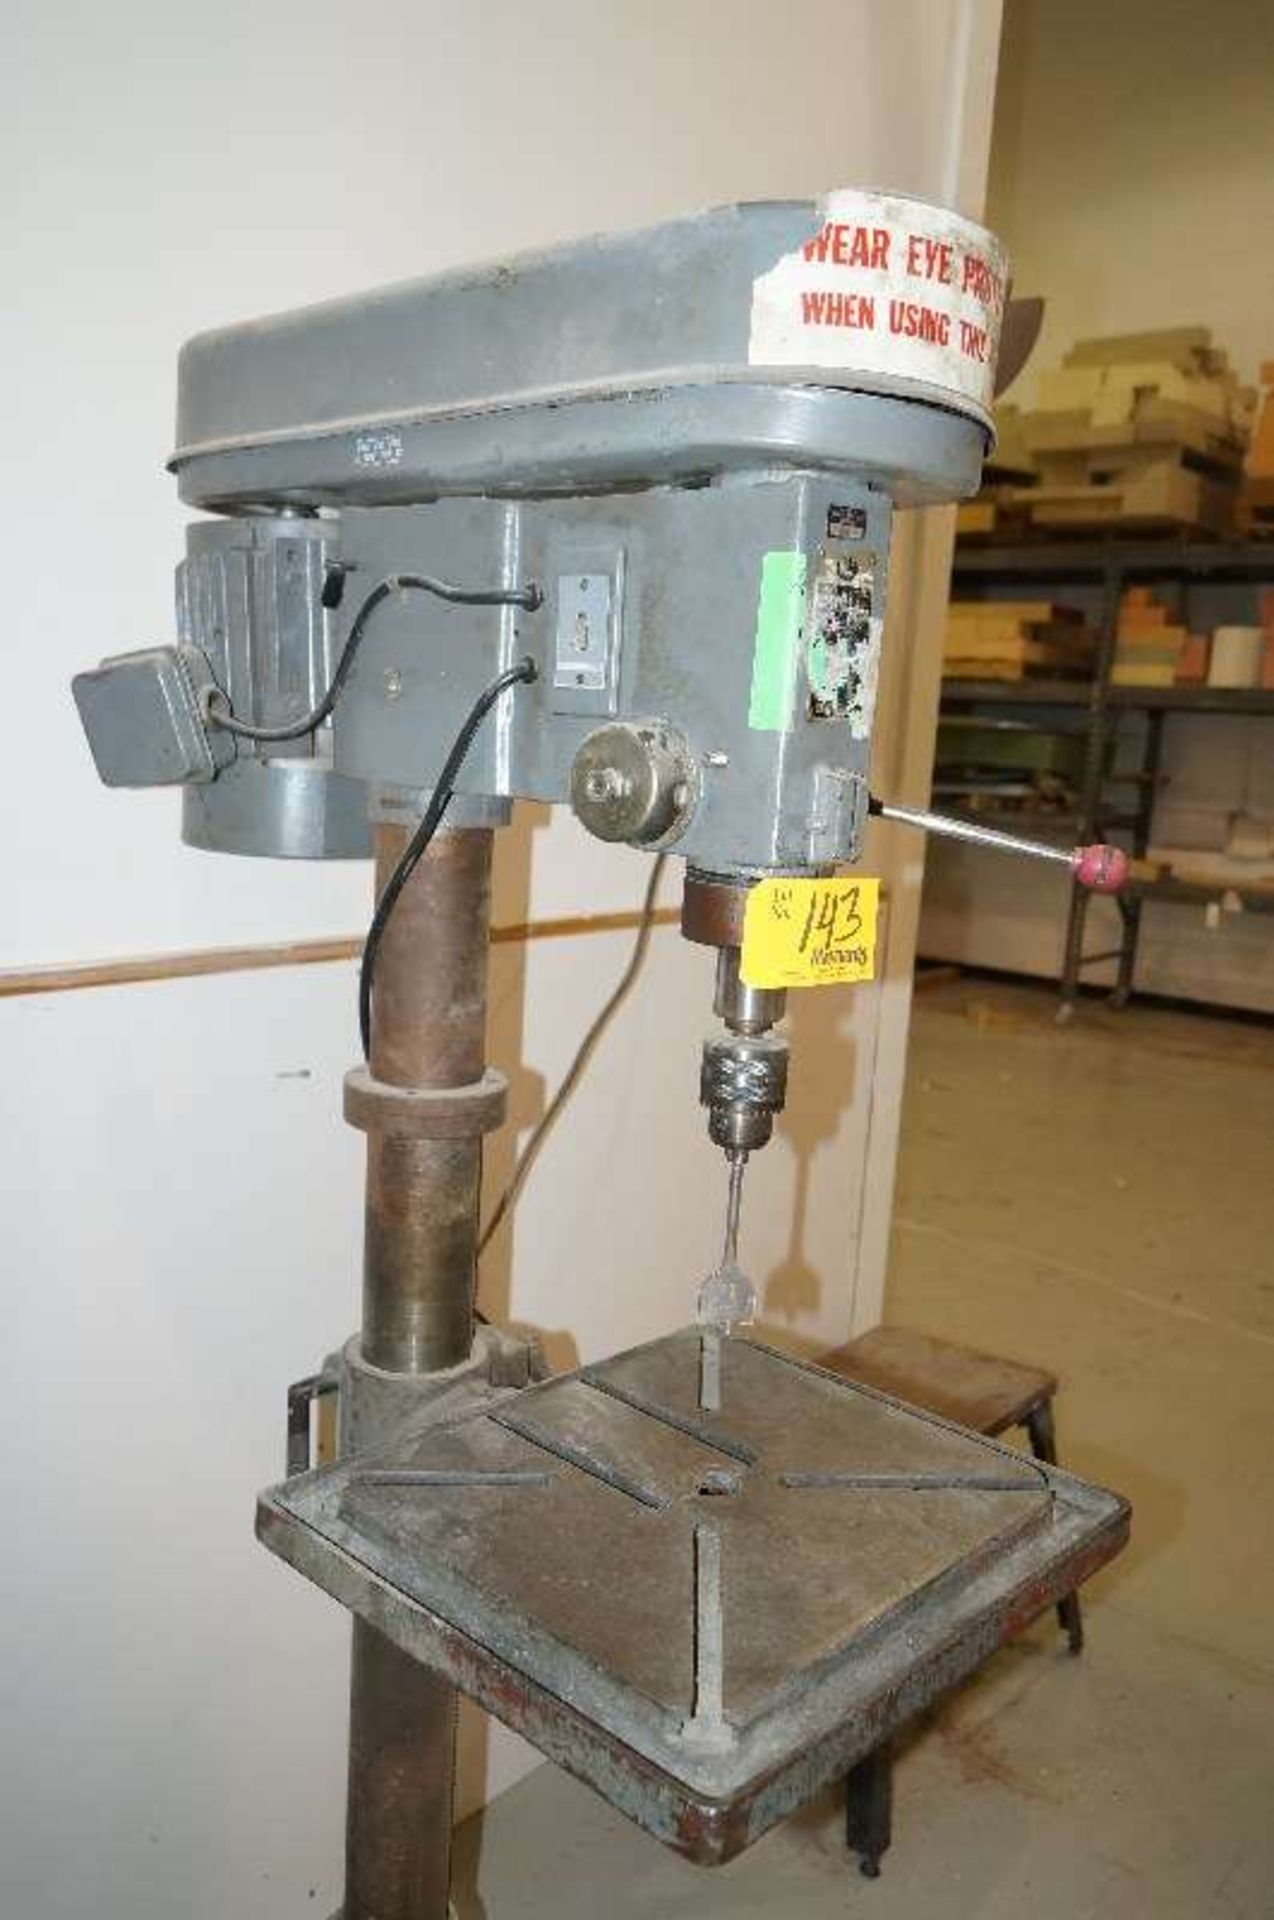 Wholesale Tool Co KTF30 Drill Press - Image 2 of 5